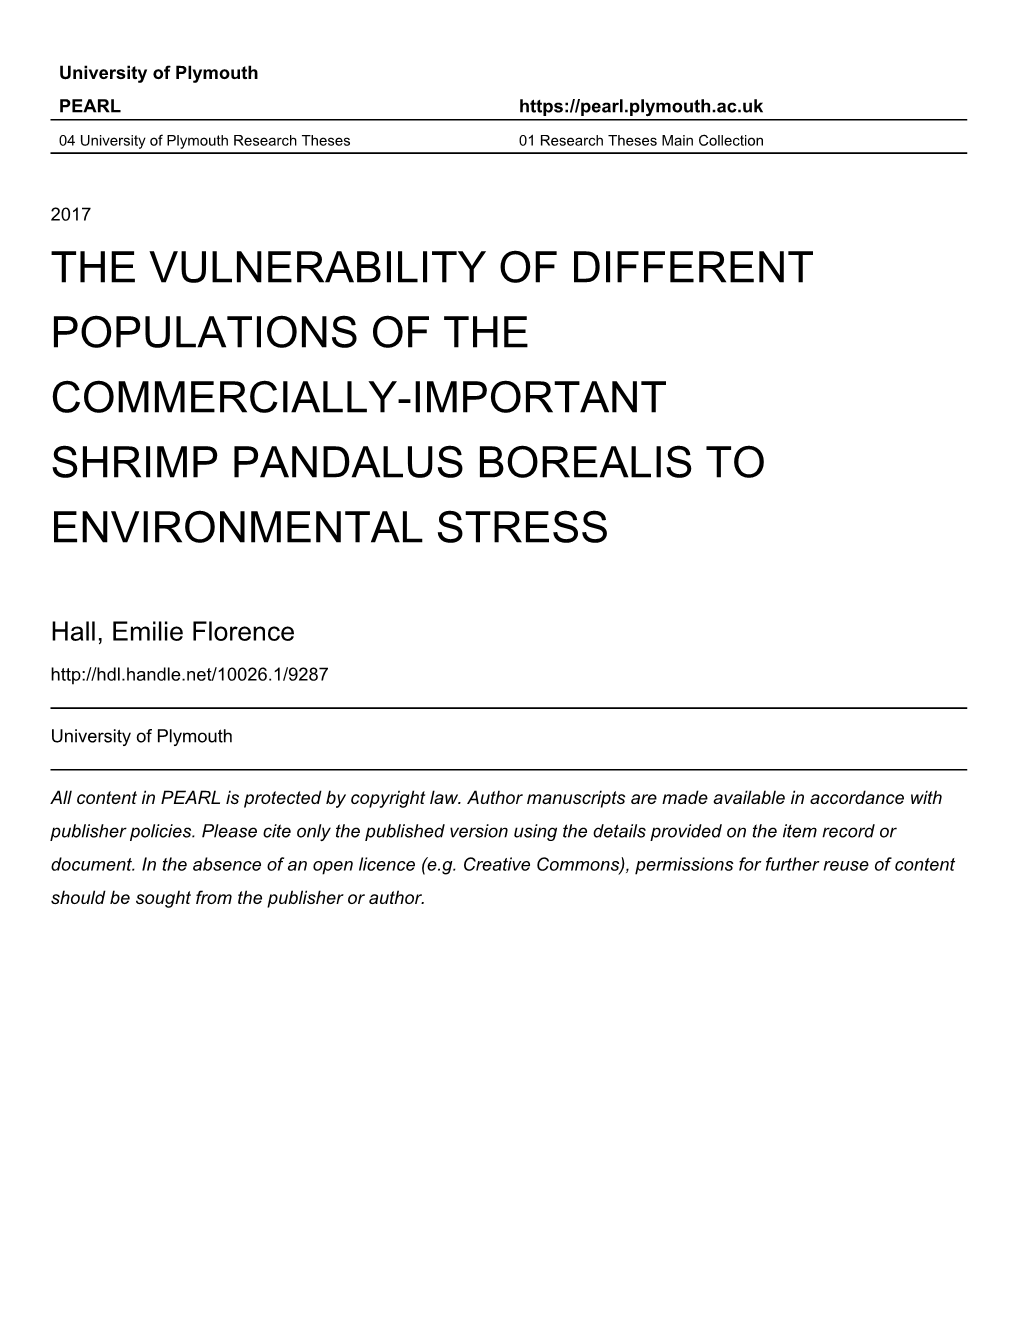 The Vulnerability of Different Populations of the Commercially-Important Shrimp Pandalus Borealis to Environmental Stress